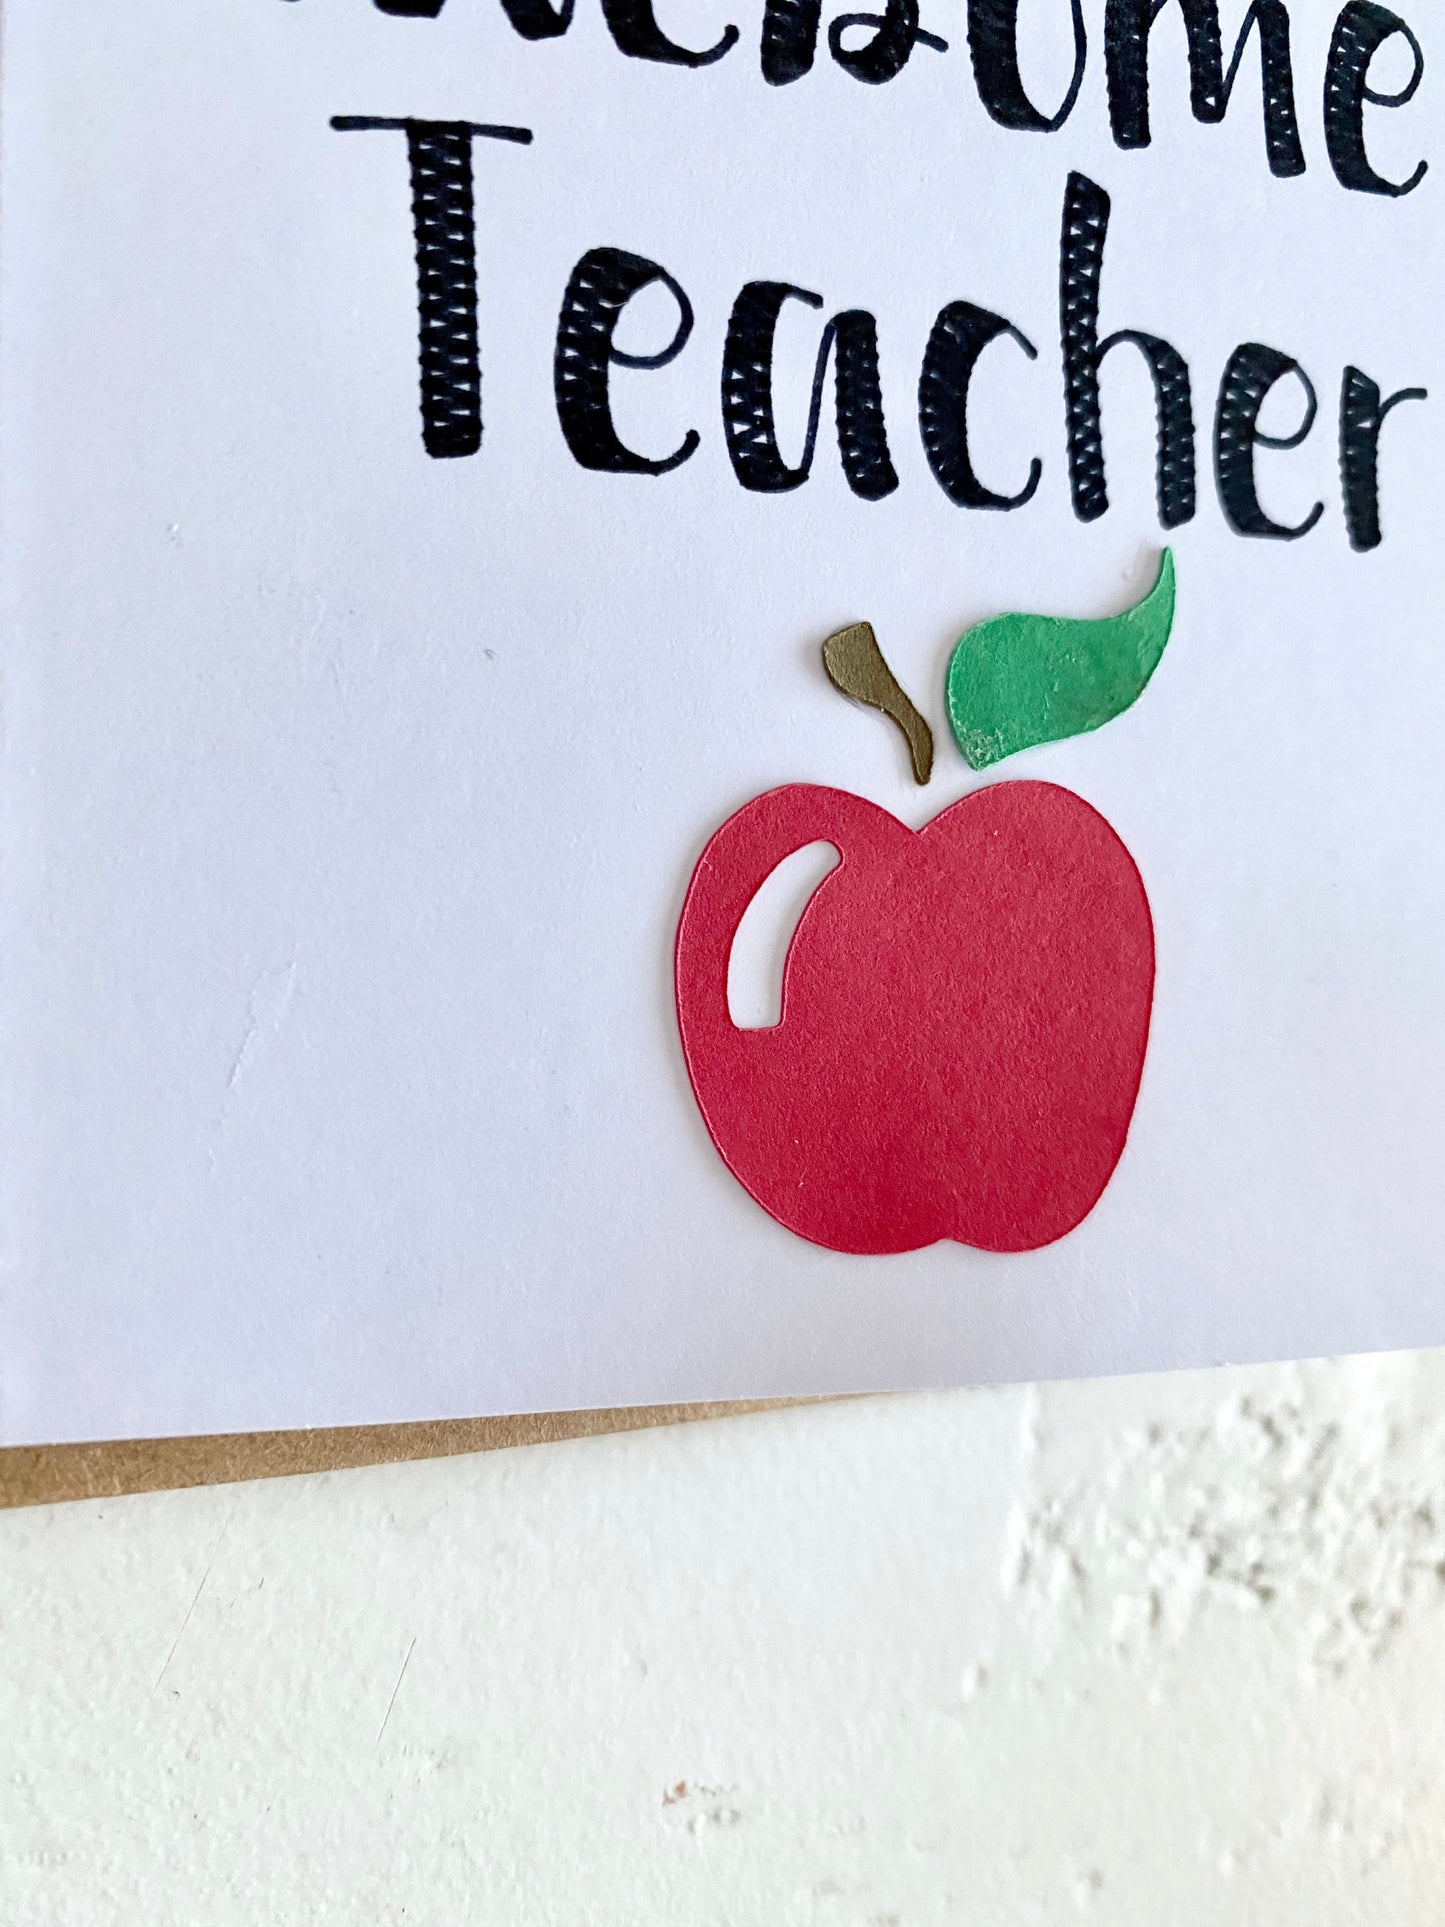 You're an awesome Teacher- Keep that shit up, Handmade Card with Envelope